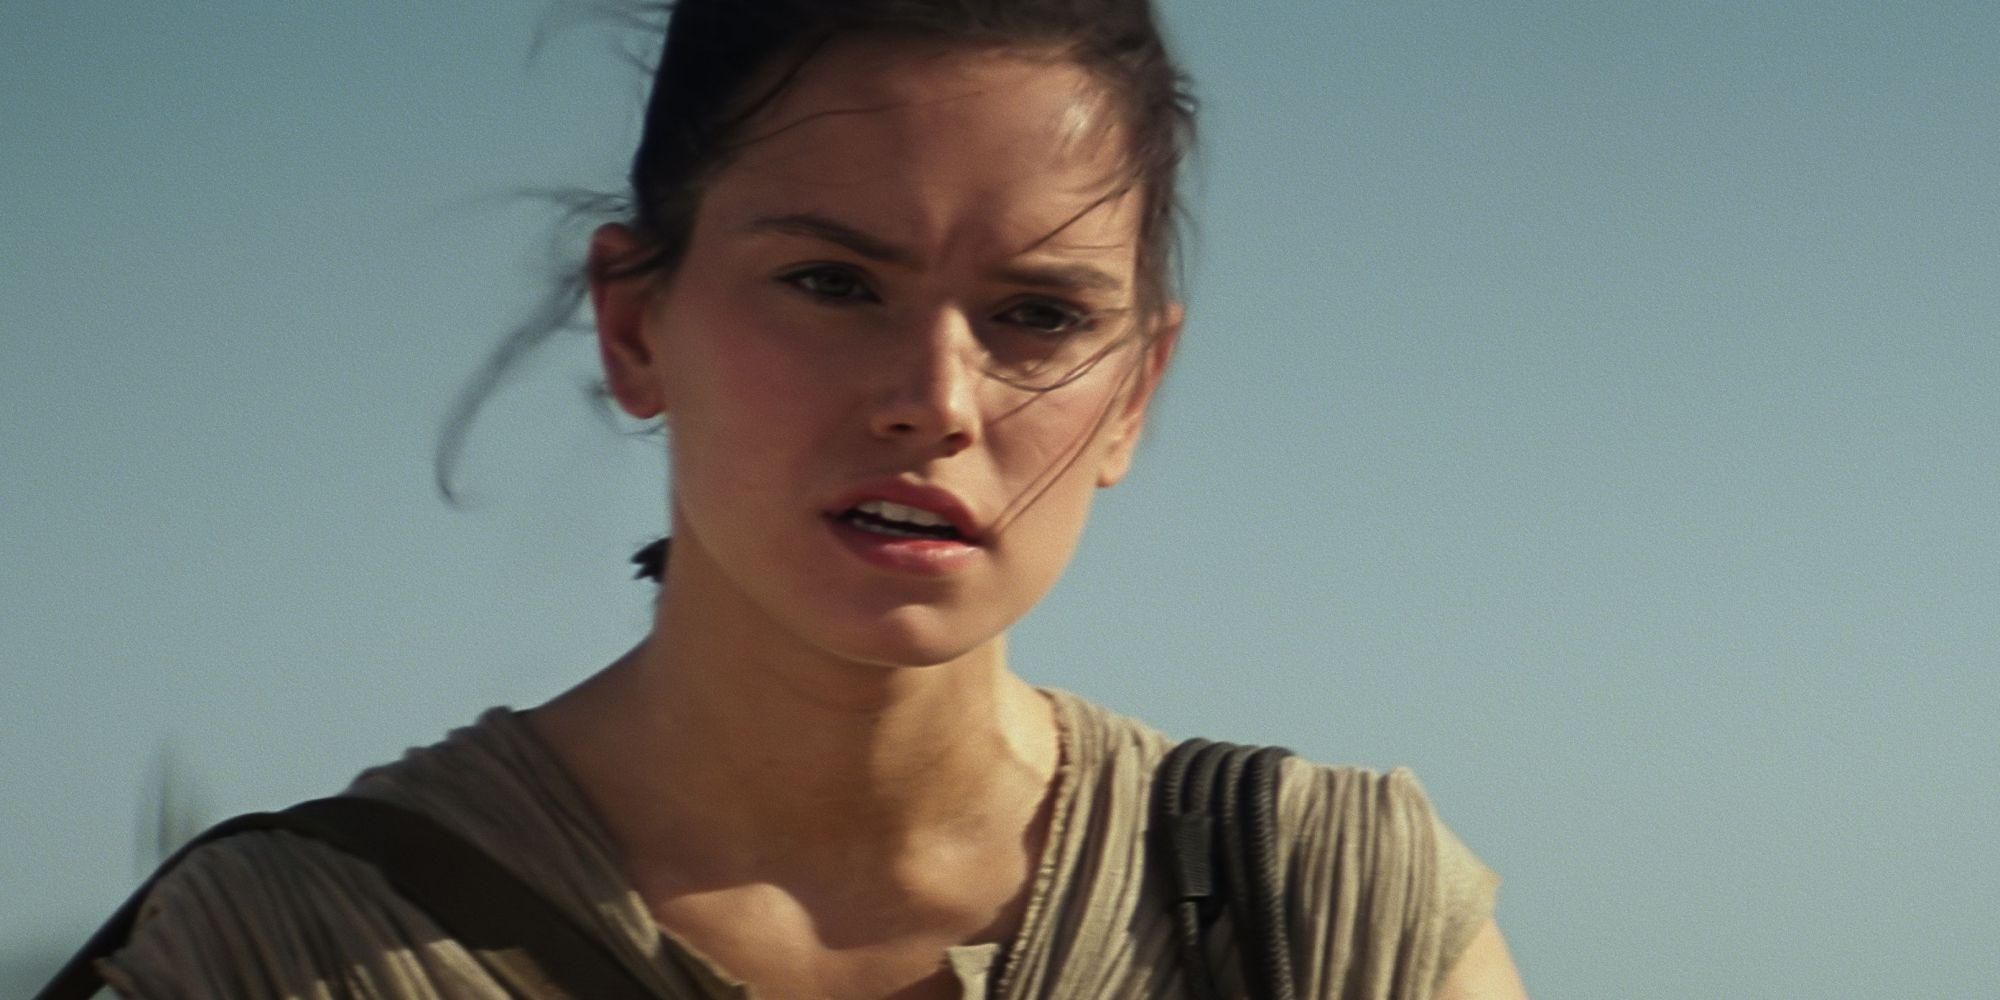 10. REY is Also PERF